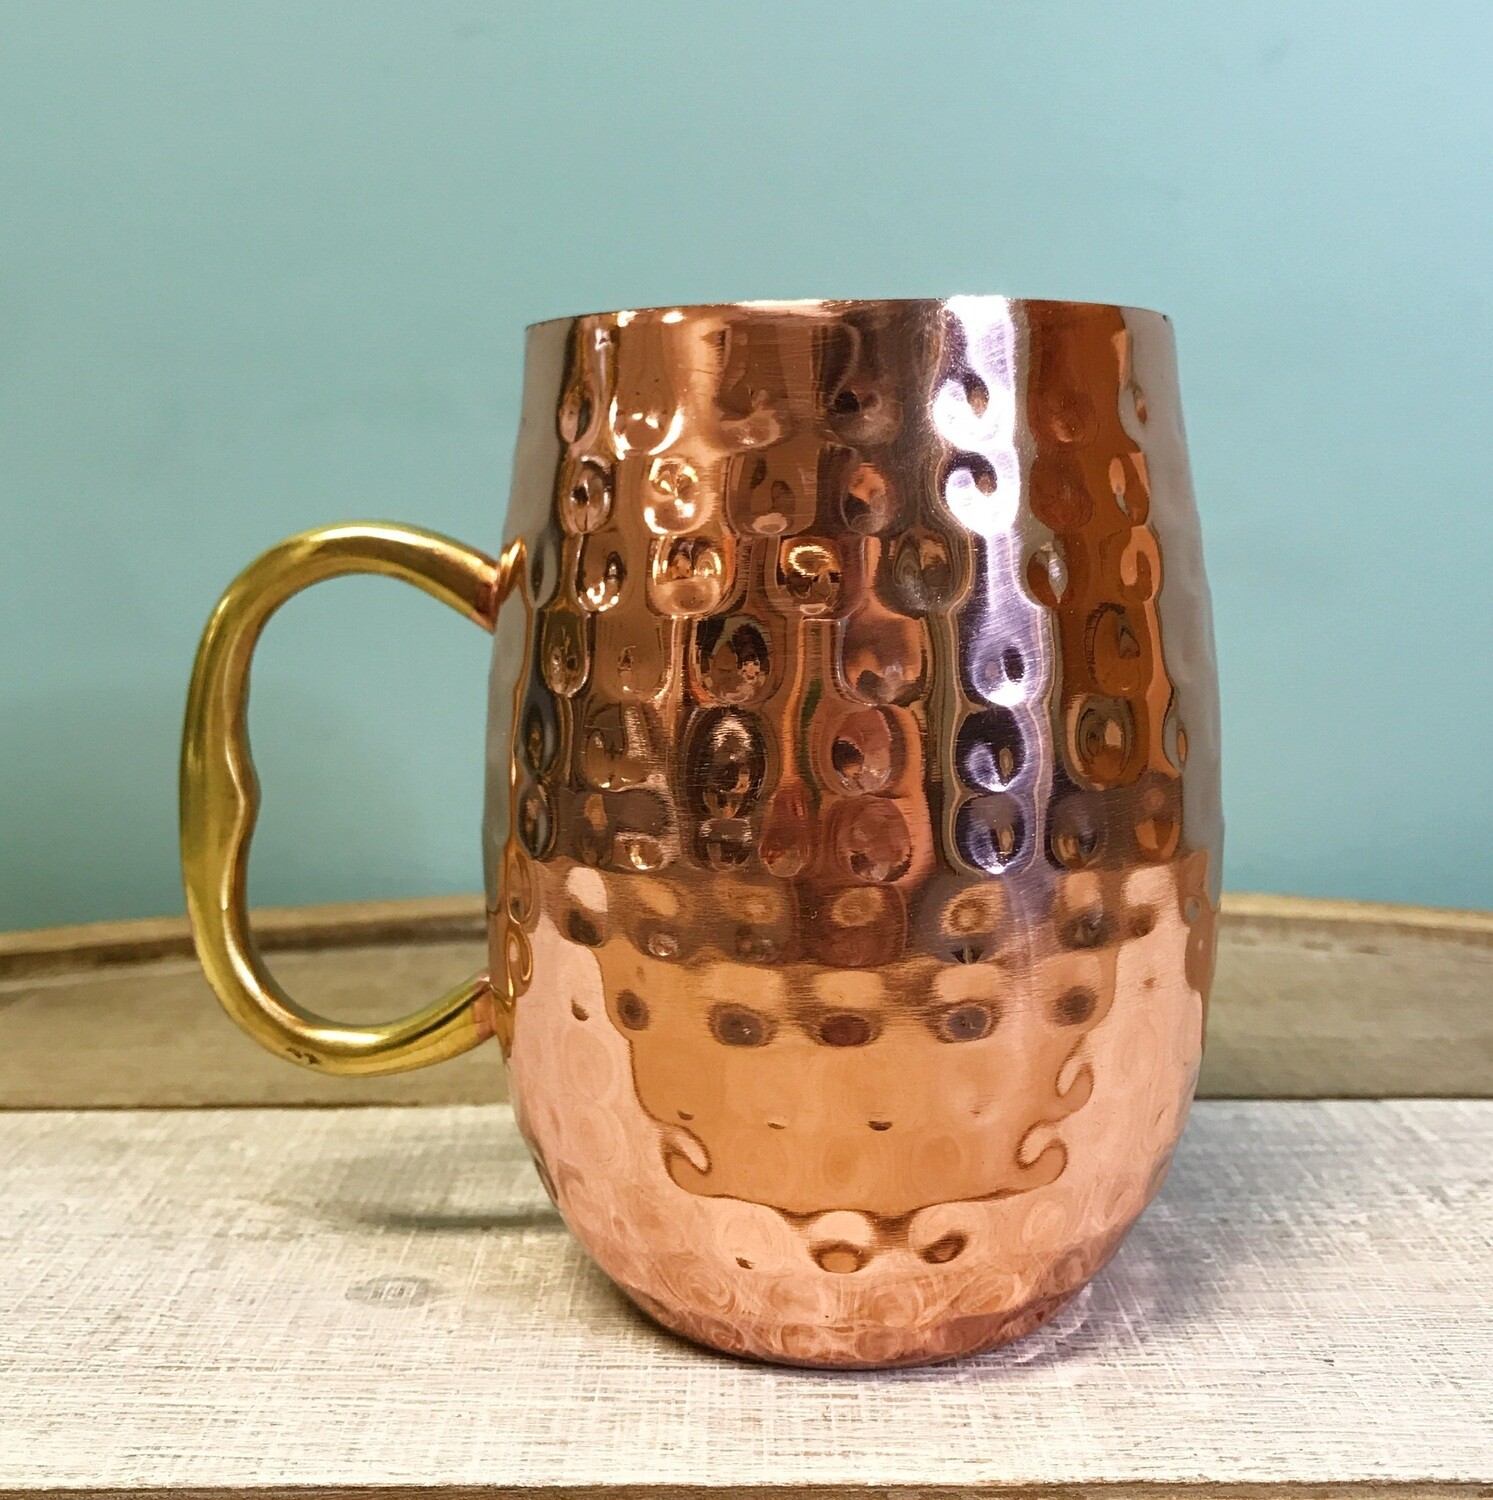 Mug Stainless Steel Moscow Mule Copper Finish